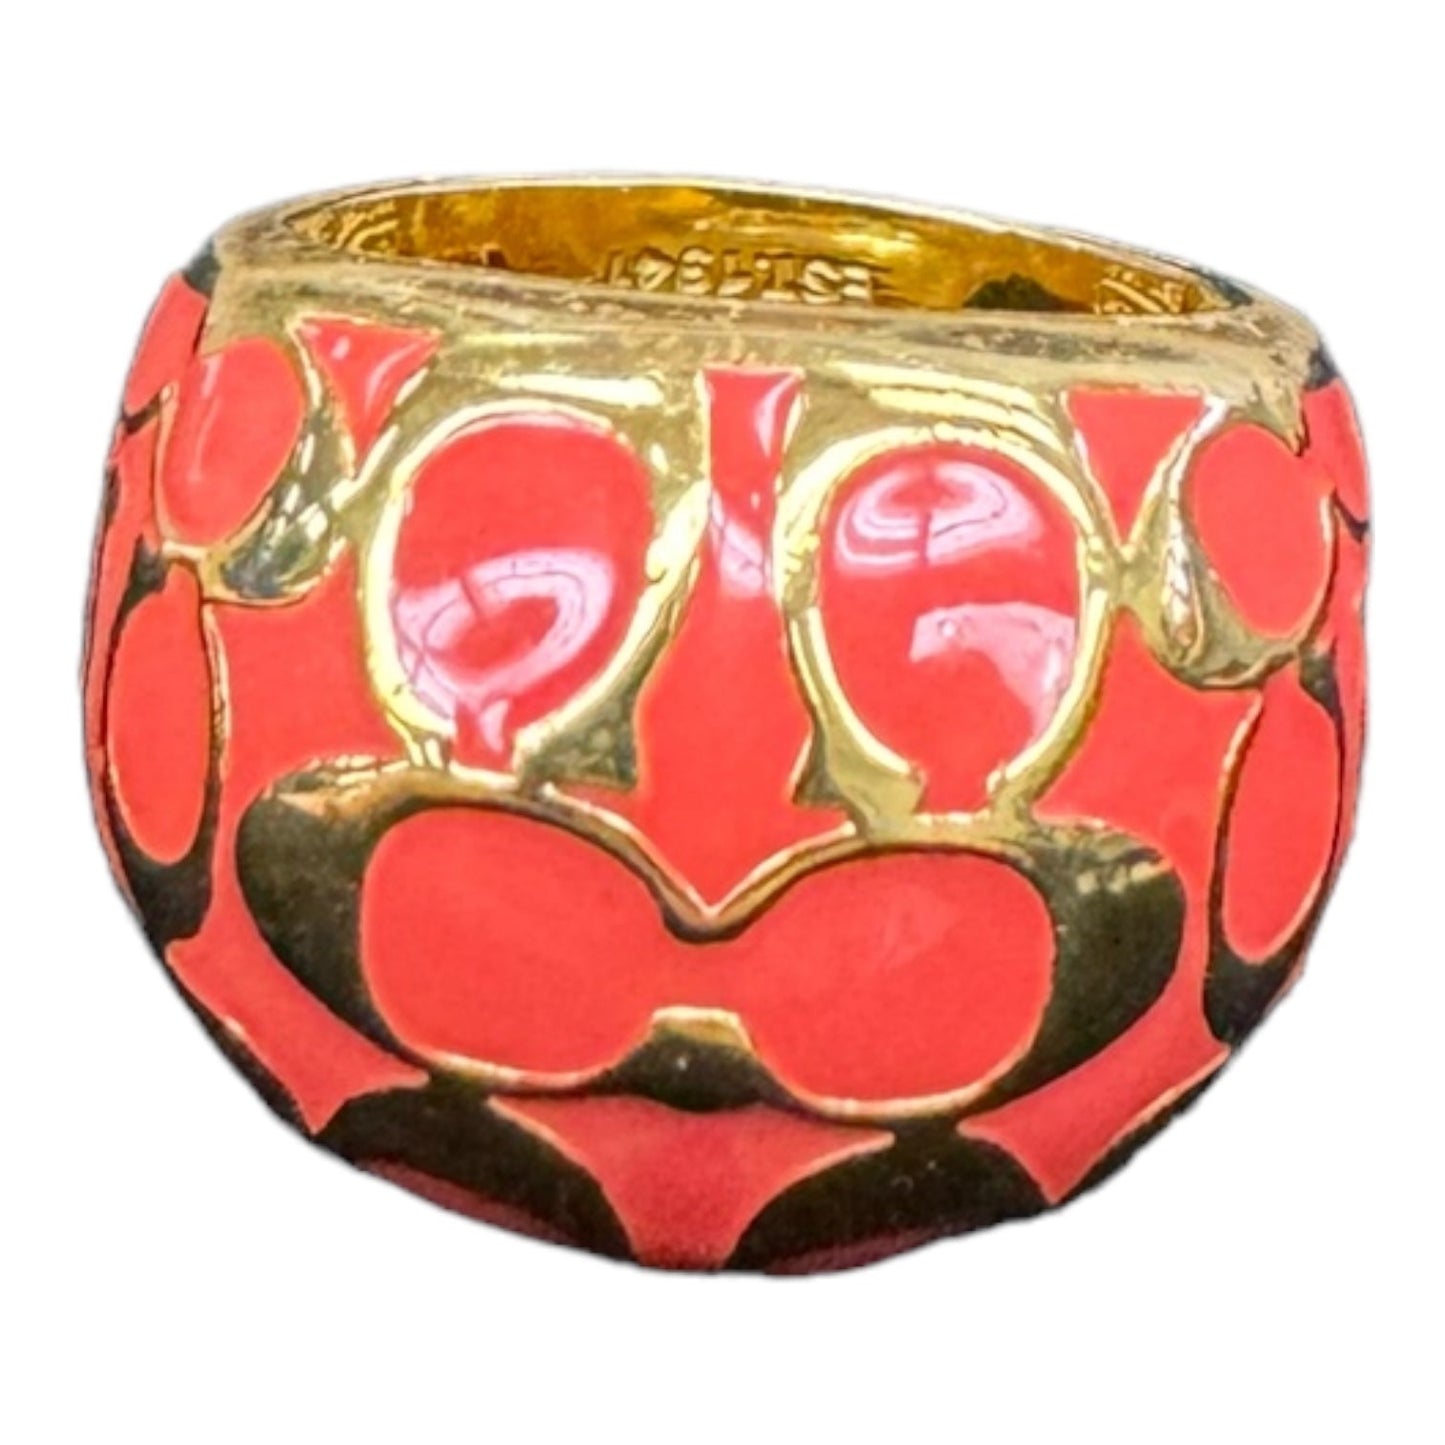 Ring Designer By Coach  Size: 7